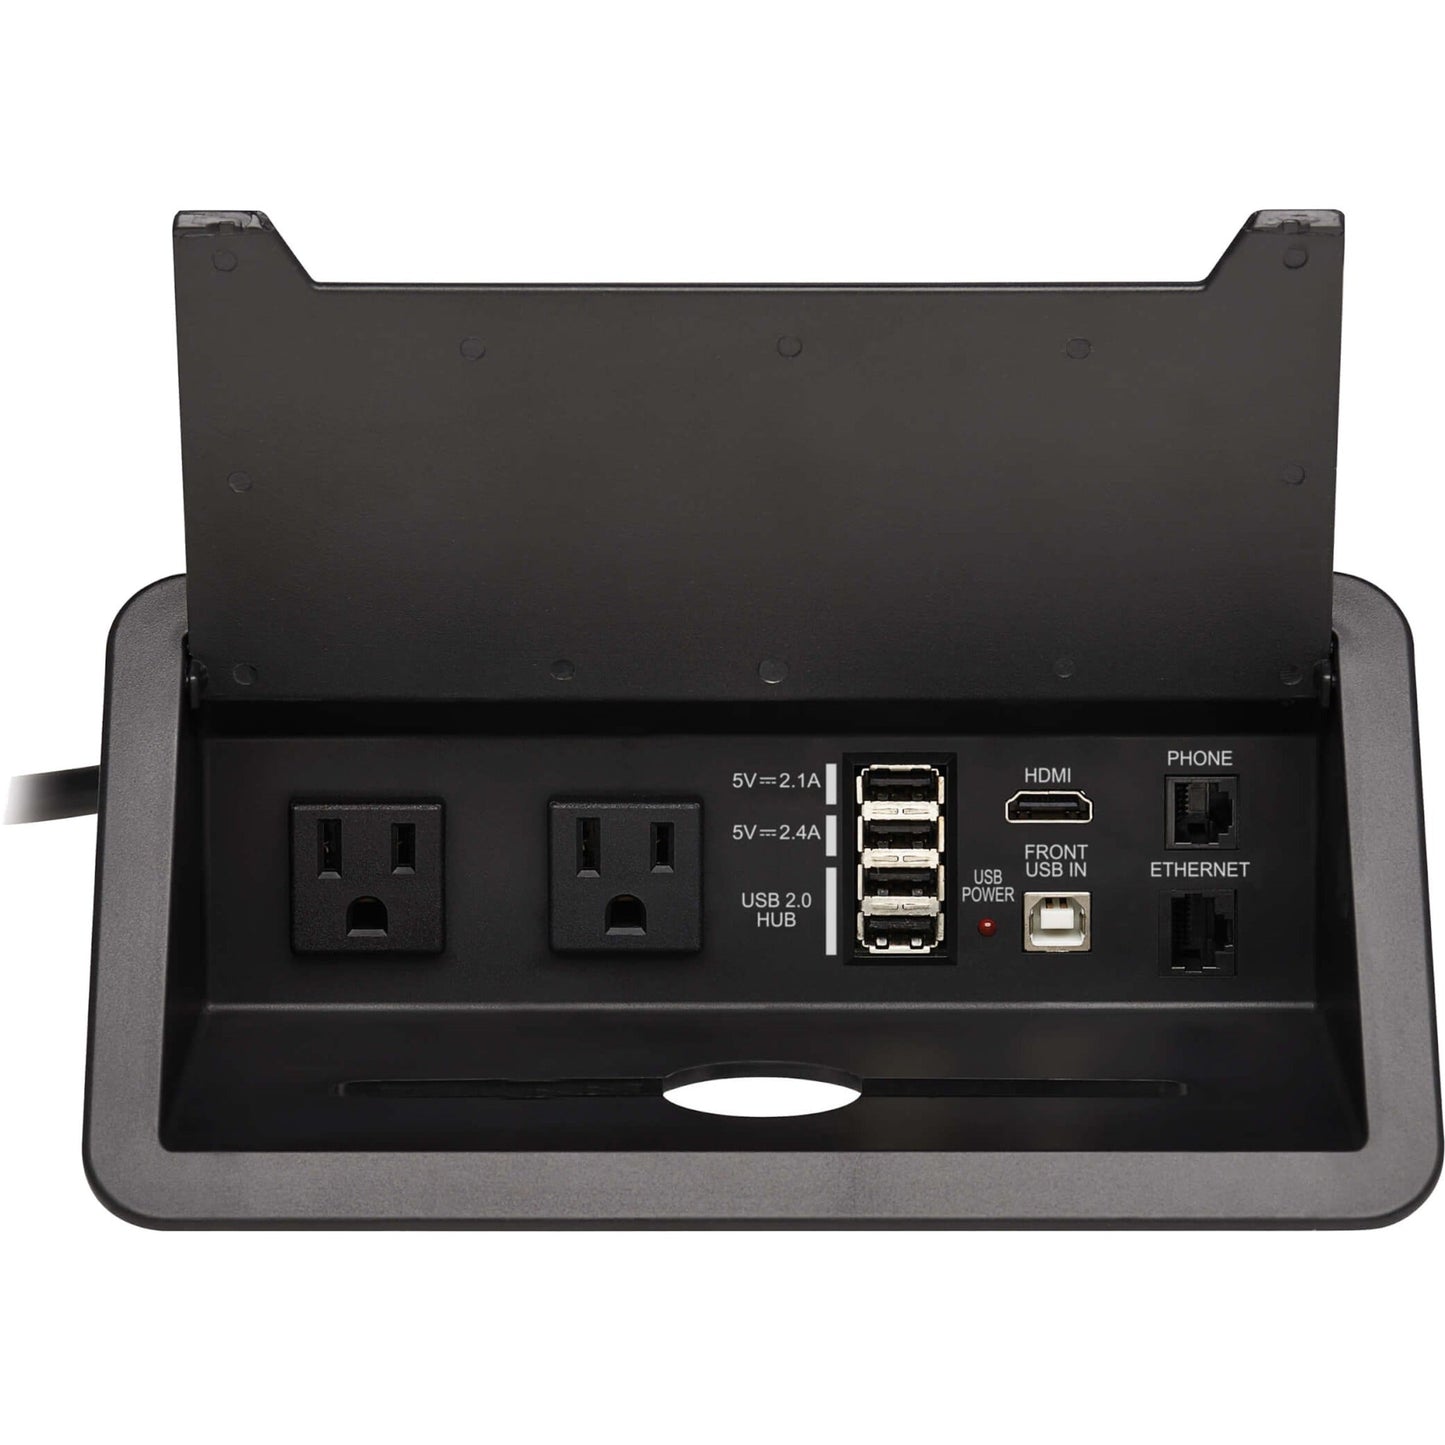 Tripp Lite Power It! 2-Outlet In-Desk Power and Charging Dock - 4x USB-A USB-B HDMI RJ11 RJ45 10 ft. Cord Antimicrobial Protection Black